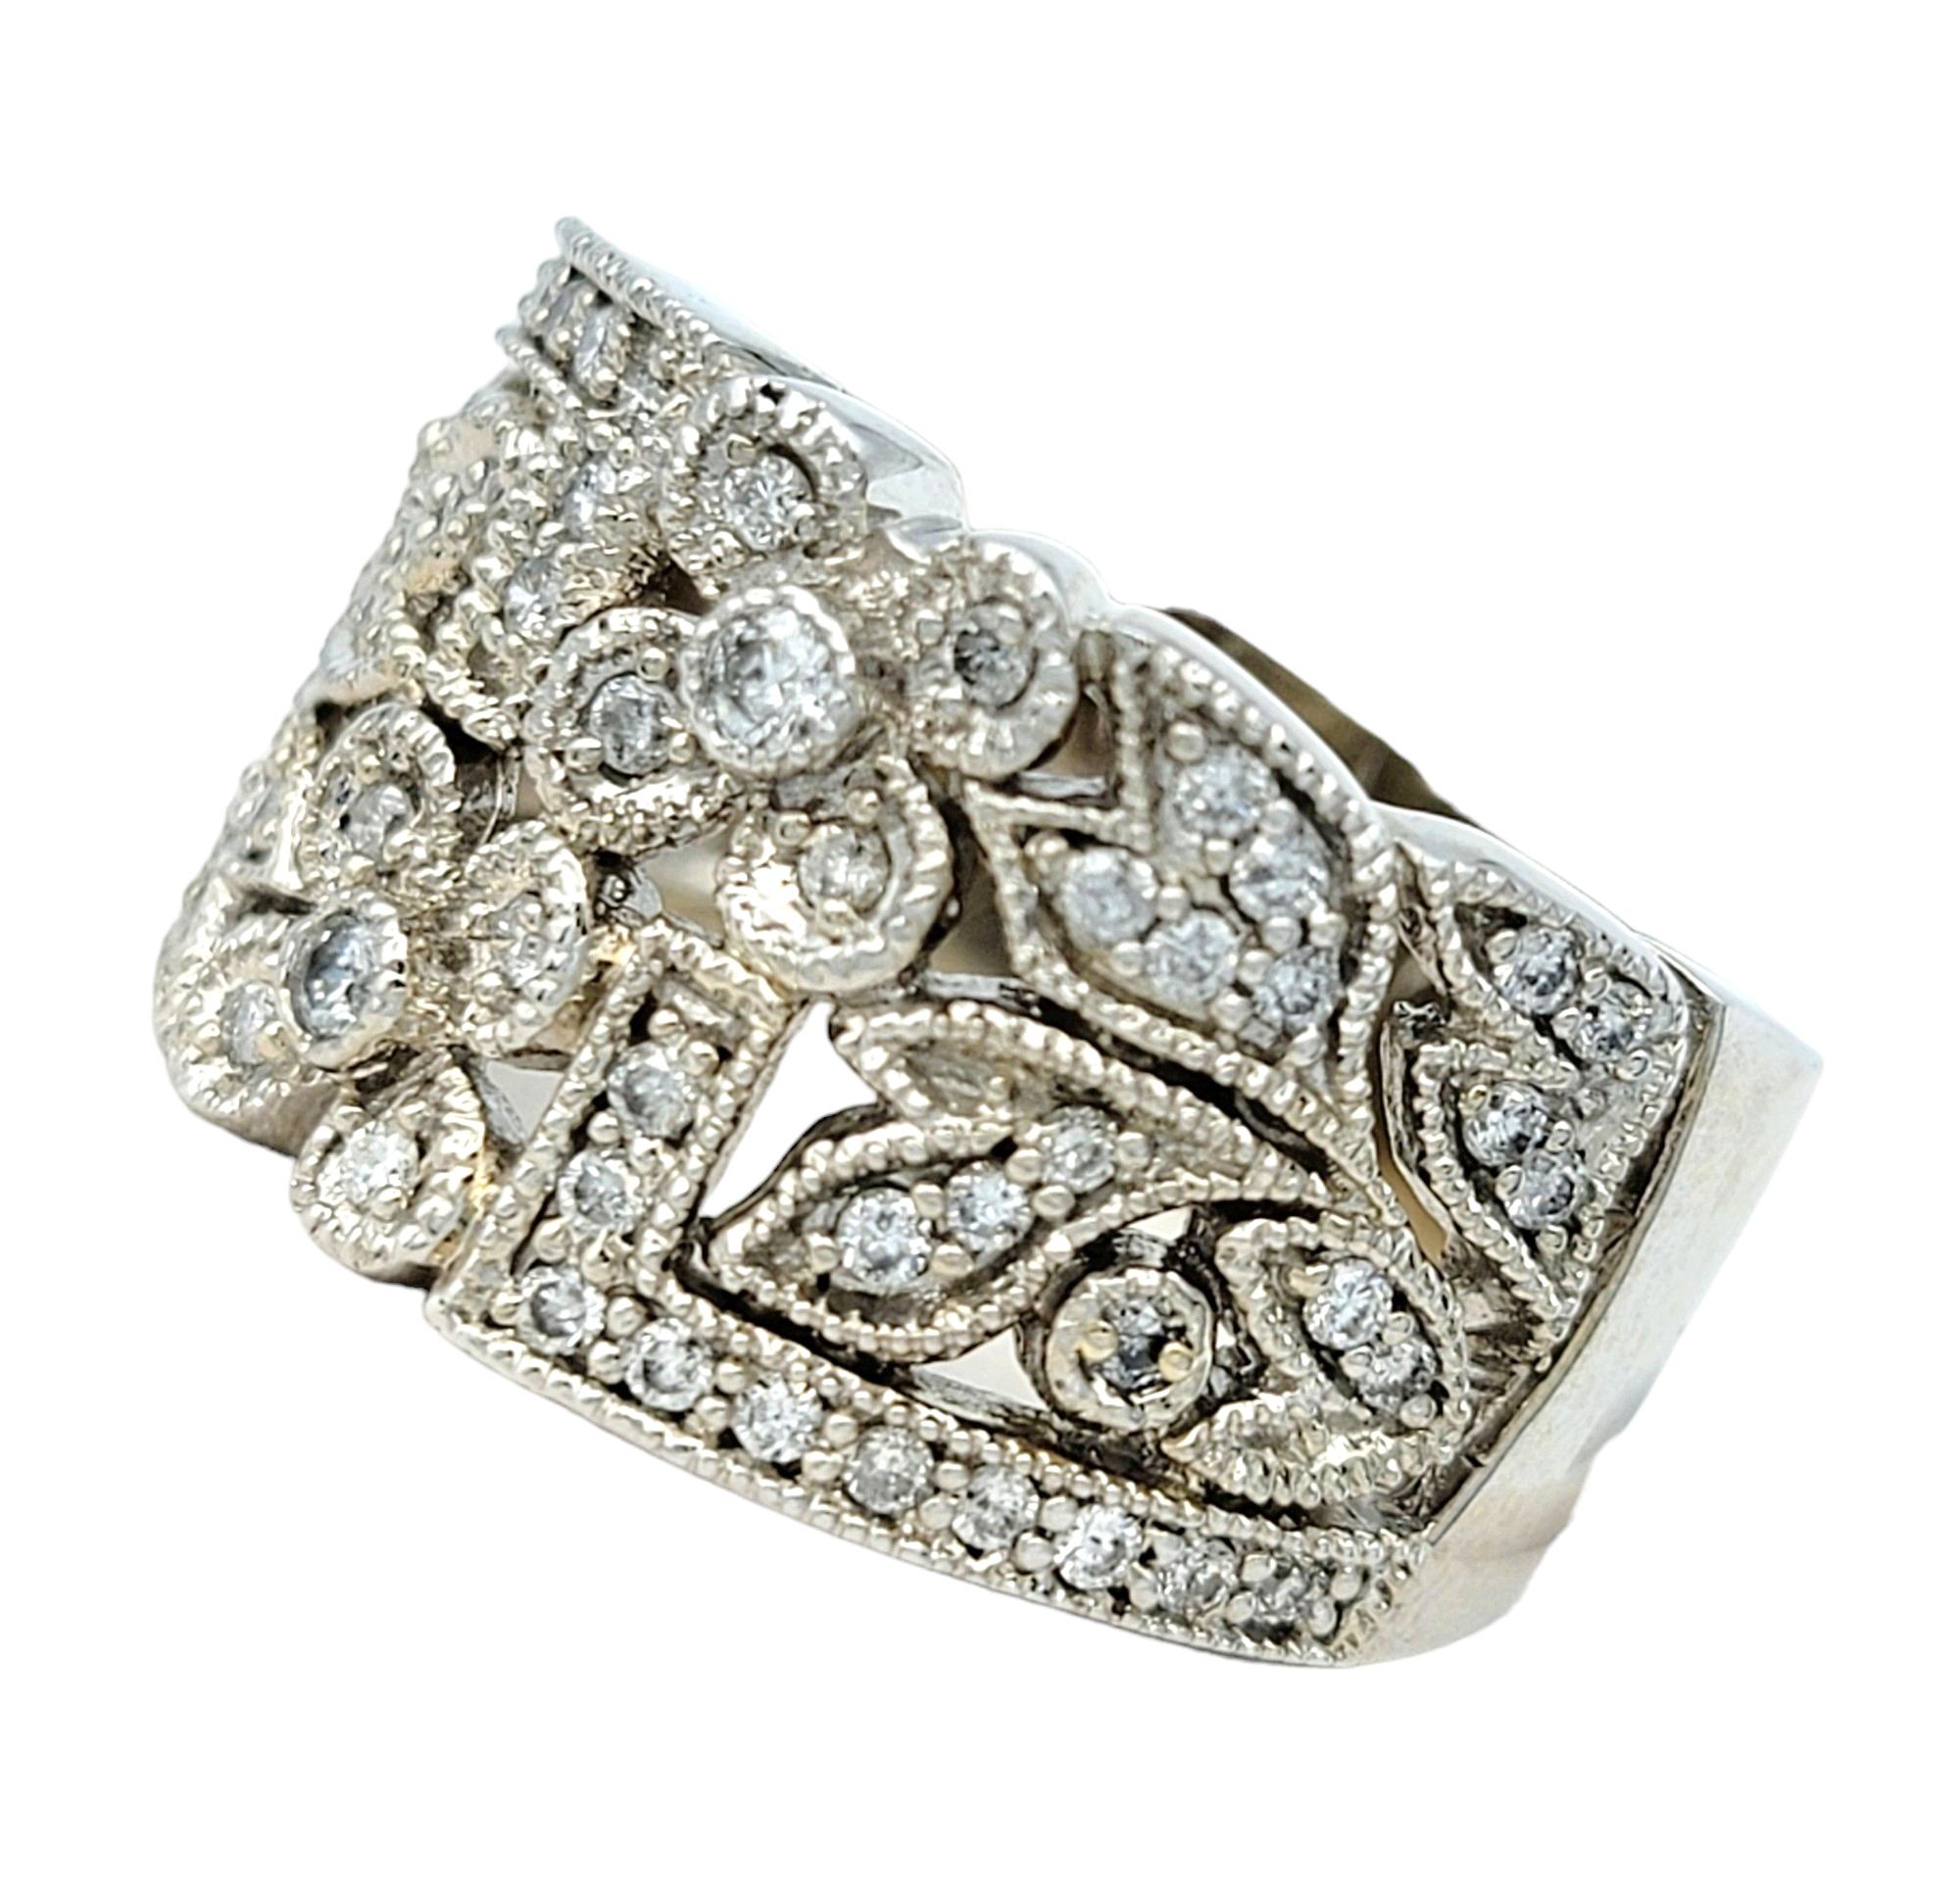 Effy Pave Diamond Flower and Leaf Design Wide Band Ring in 14 Karat White Gold In Good Condition For Sale In Scottsdale, AZ